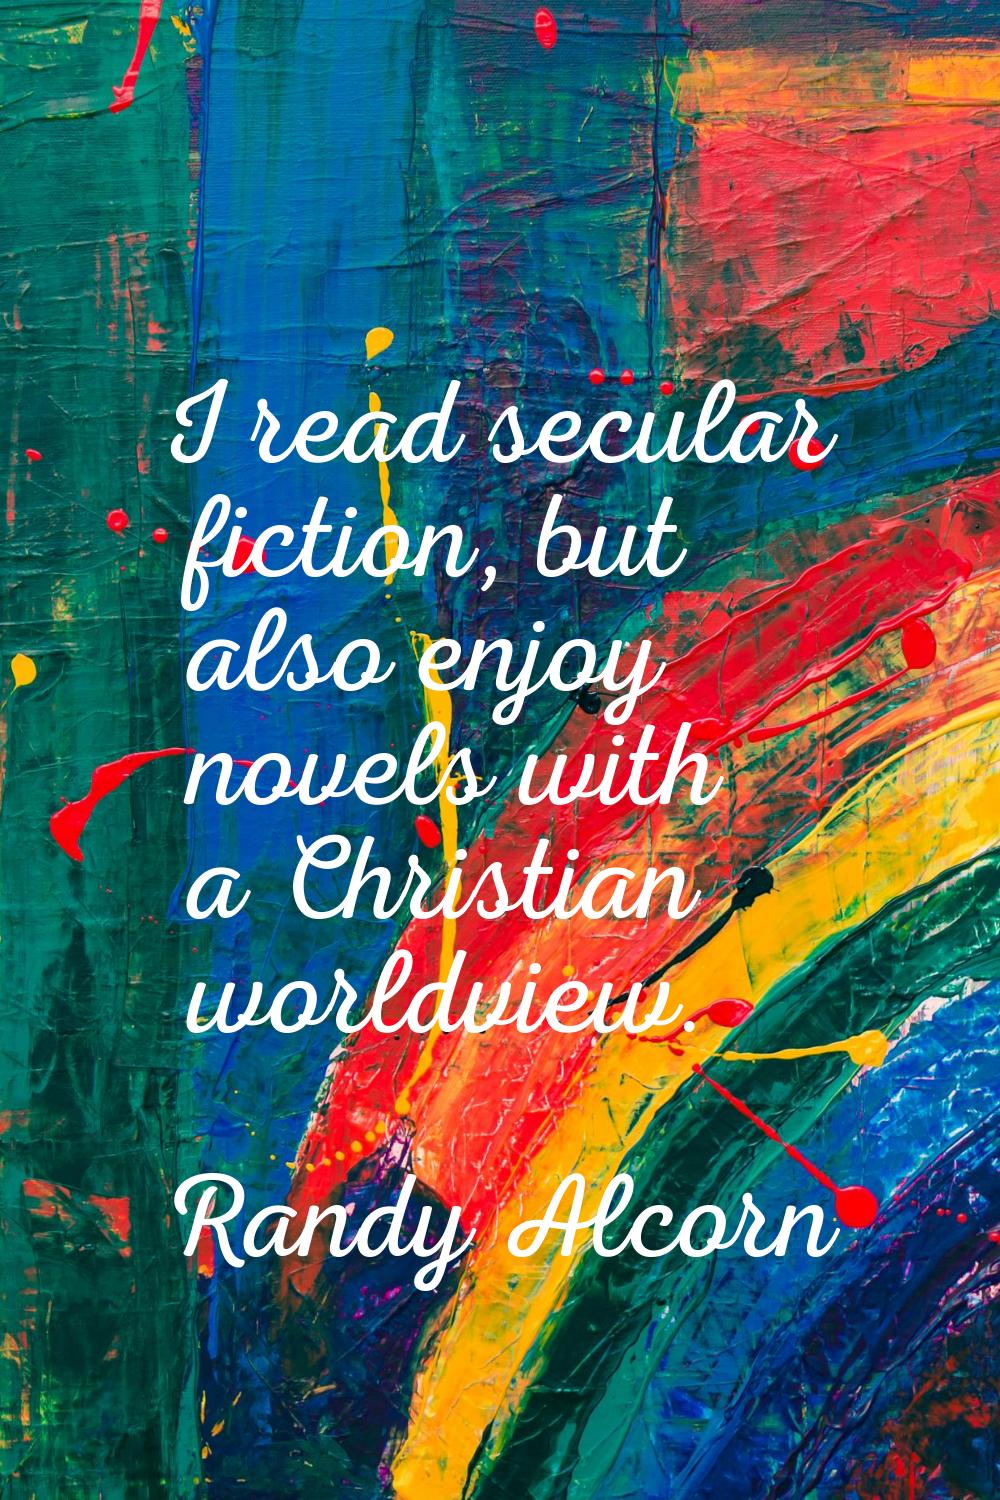 I read secular fiction, but also enjoy novels with a Christian worldview.